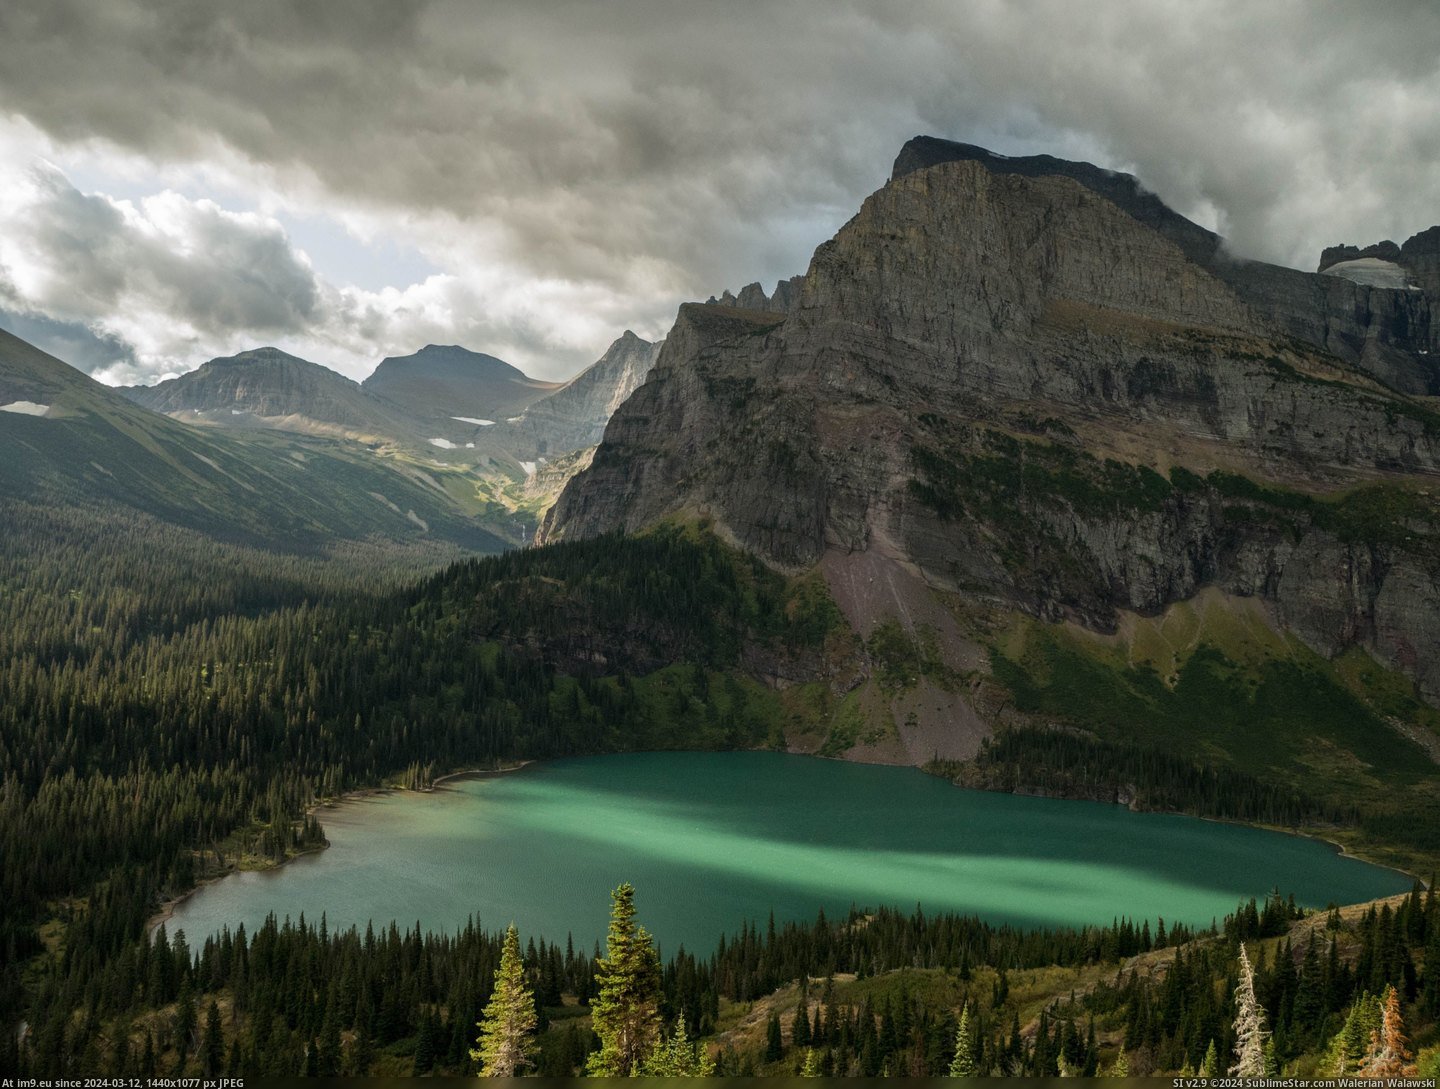 #Lake #4000x3000 #Timelapse #Montana [Earthporn] Grinnell Lake, Montana  [4000x3000] (4K Timelapse in Comments) Pic. (Image of album My r/EARTHPORN favs))